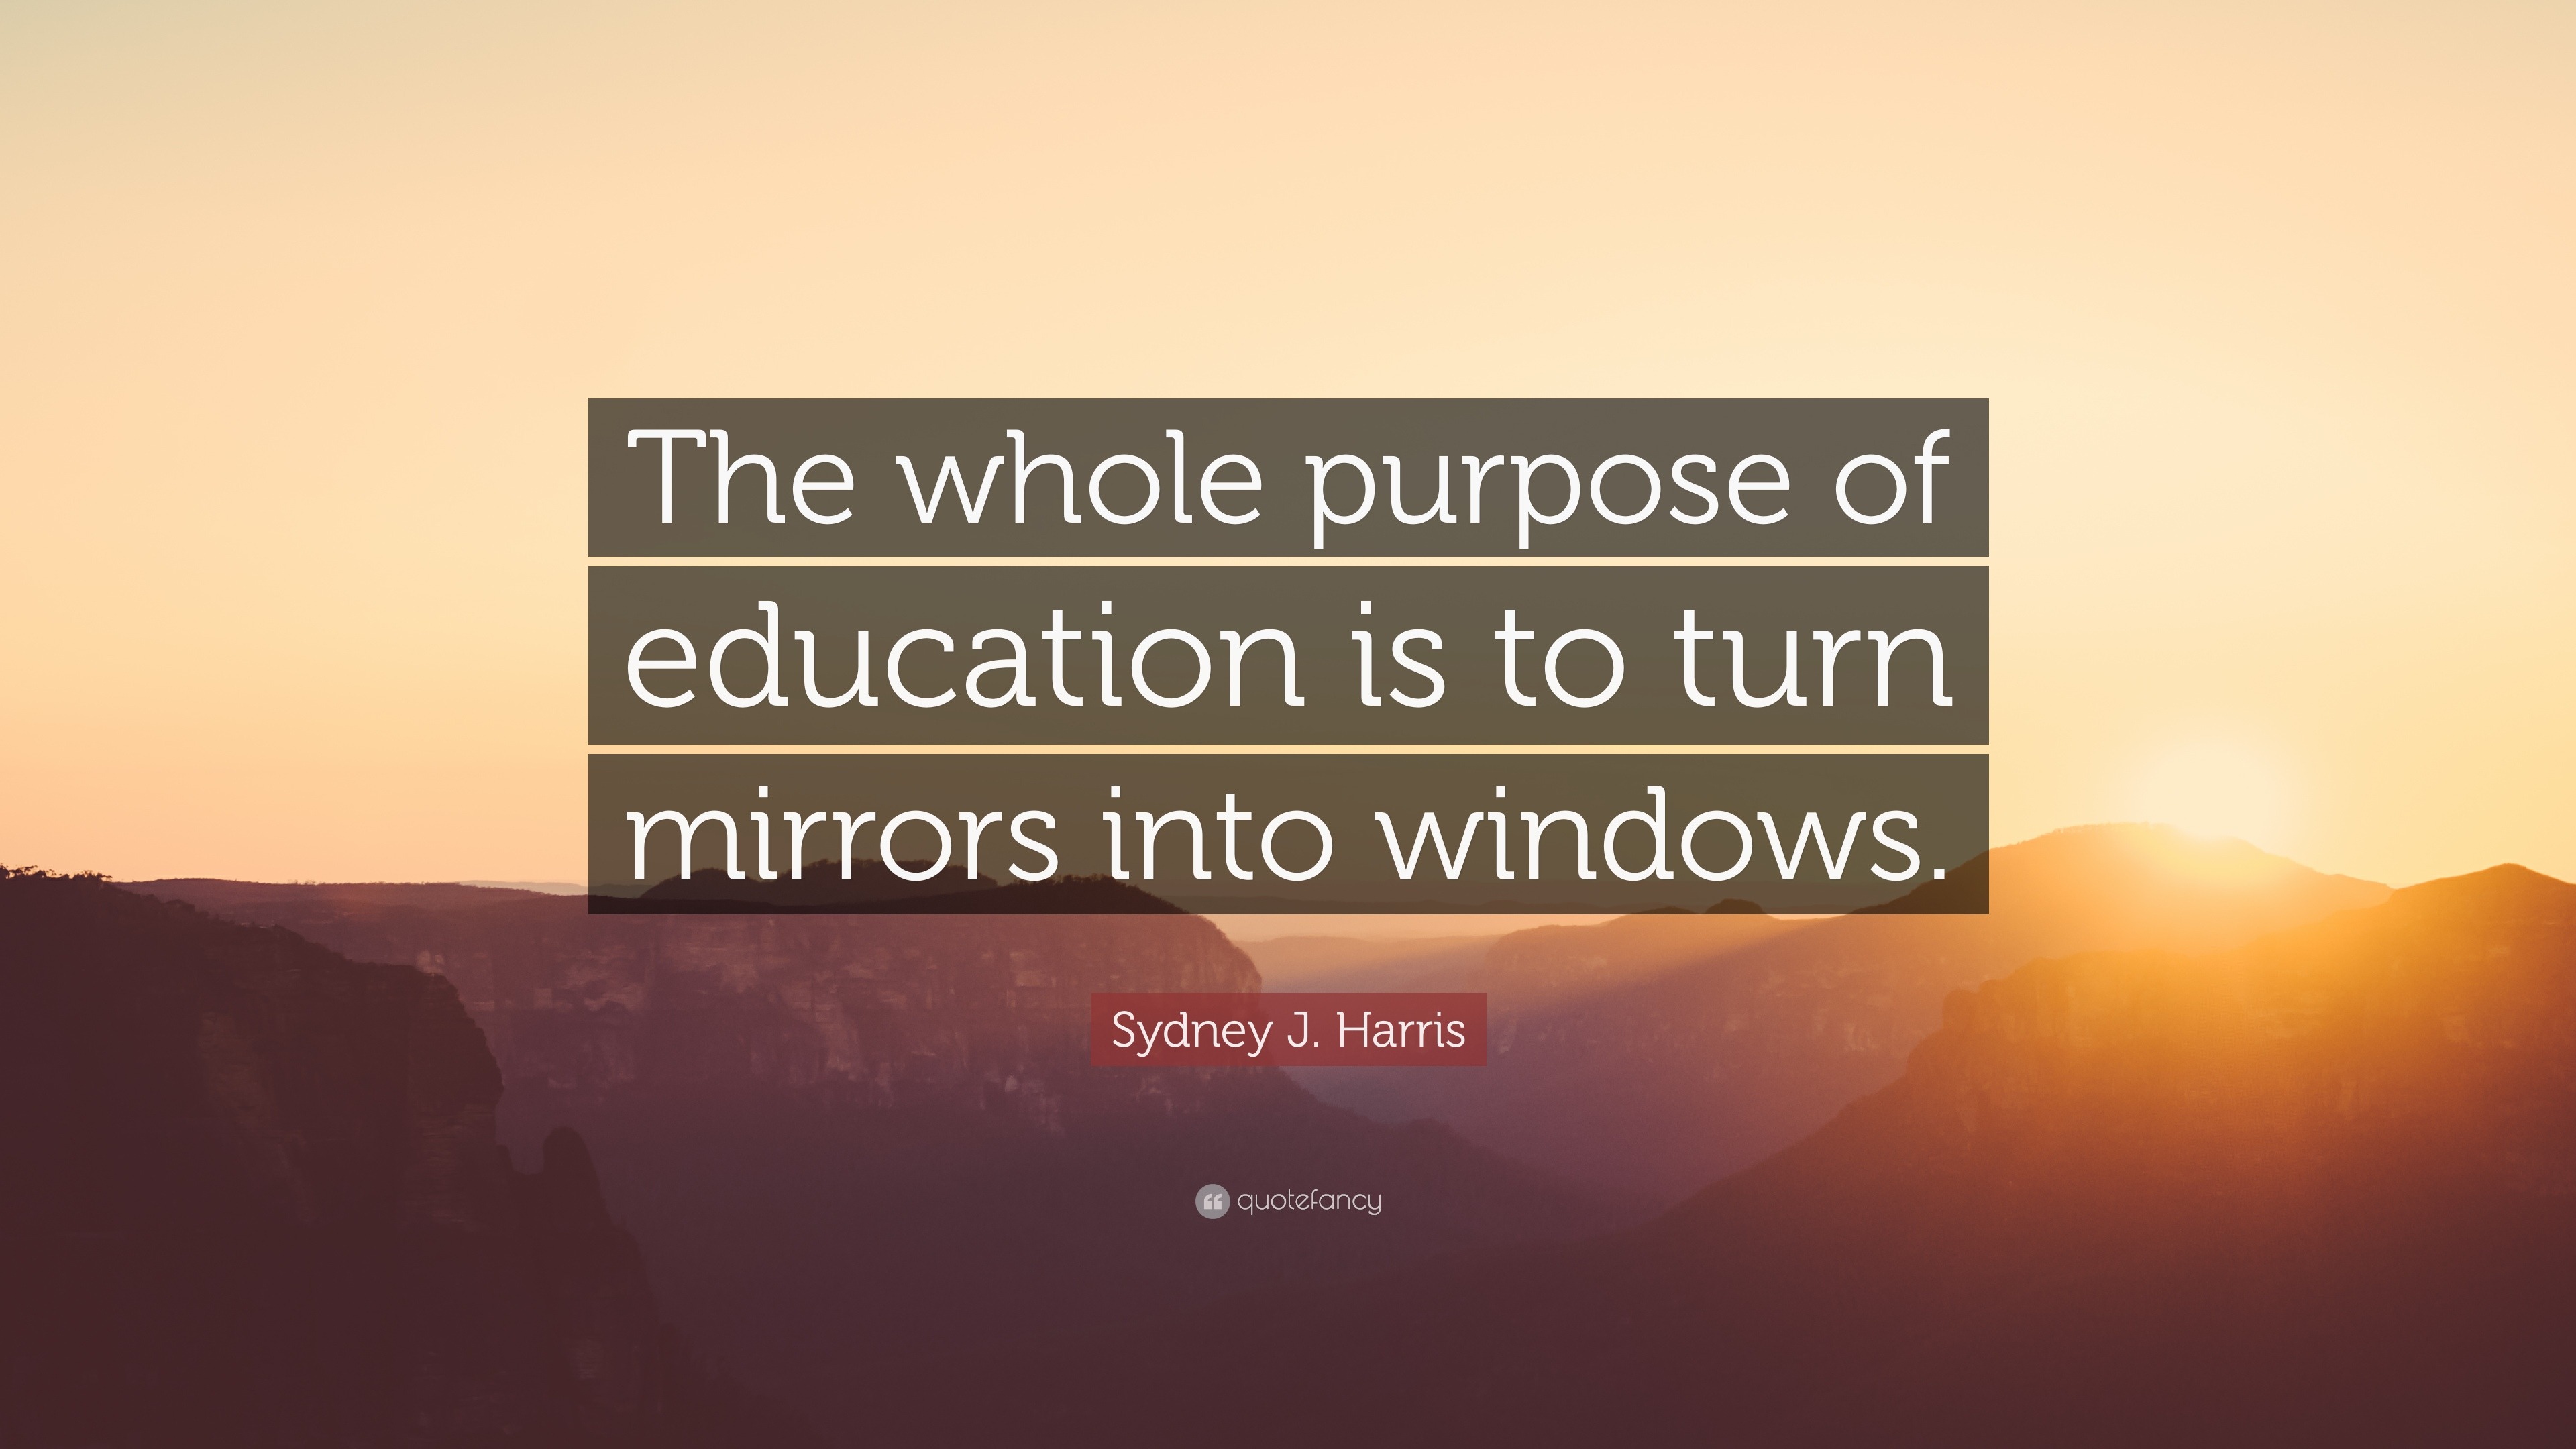 Sydney J. Harris Quote: “The whole purpose of education is to turn